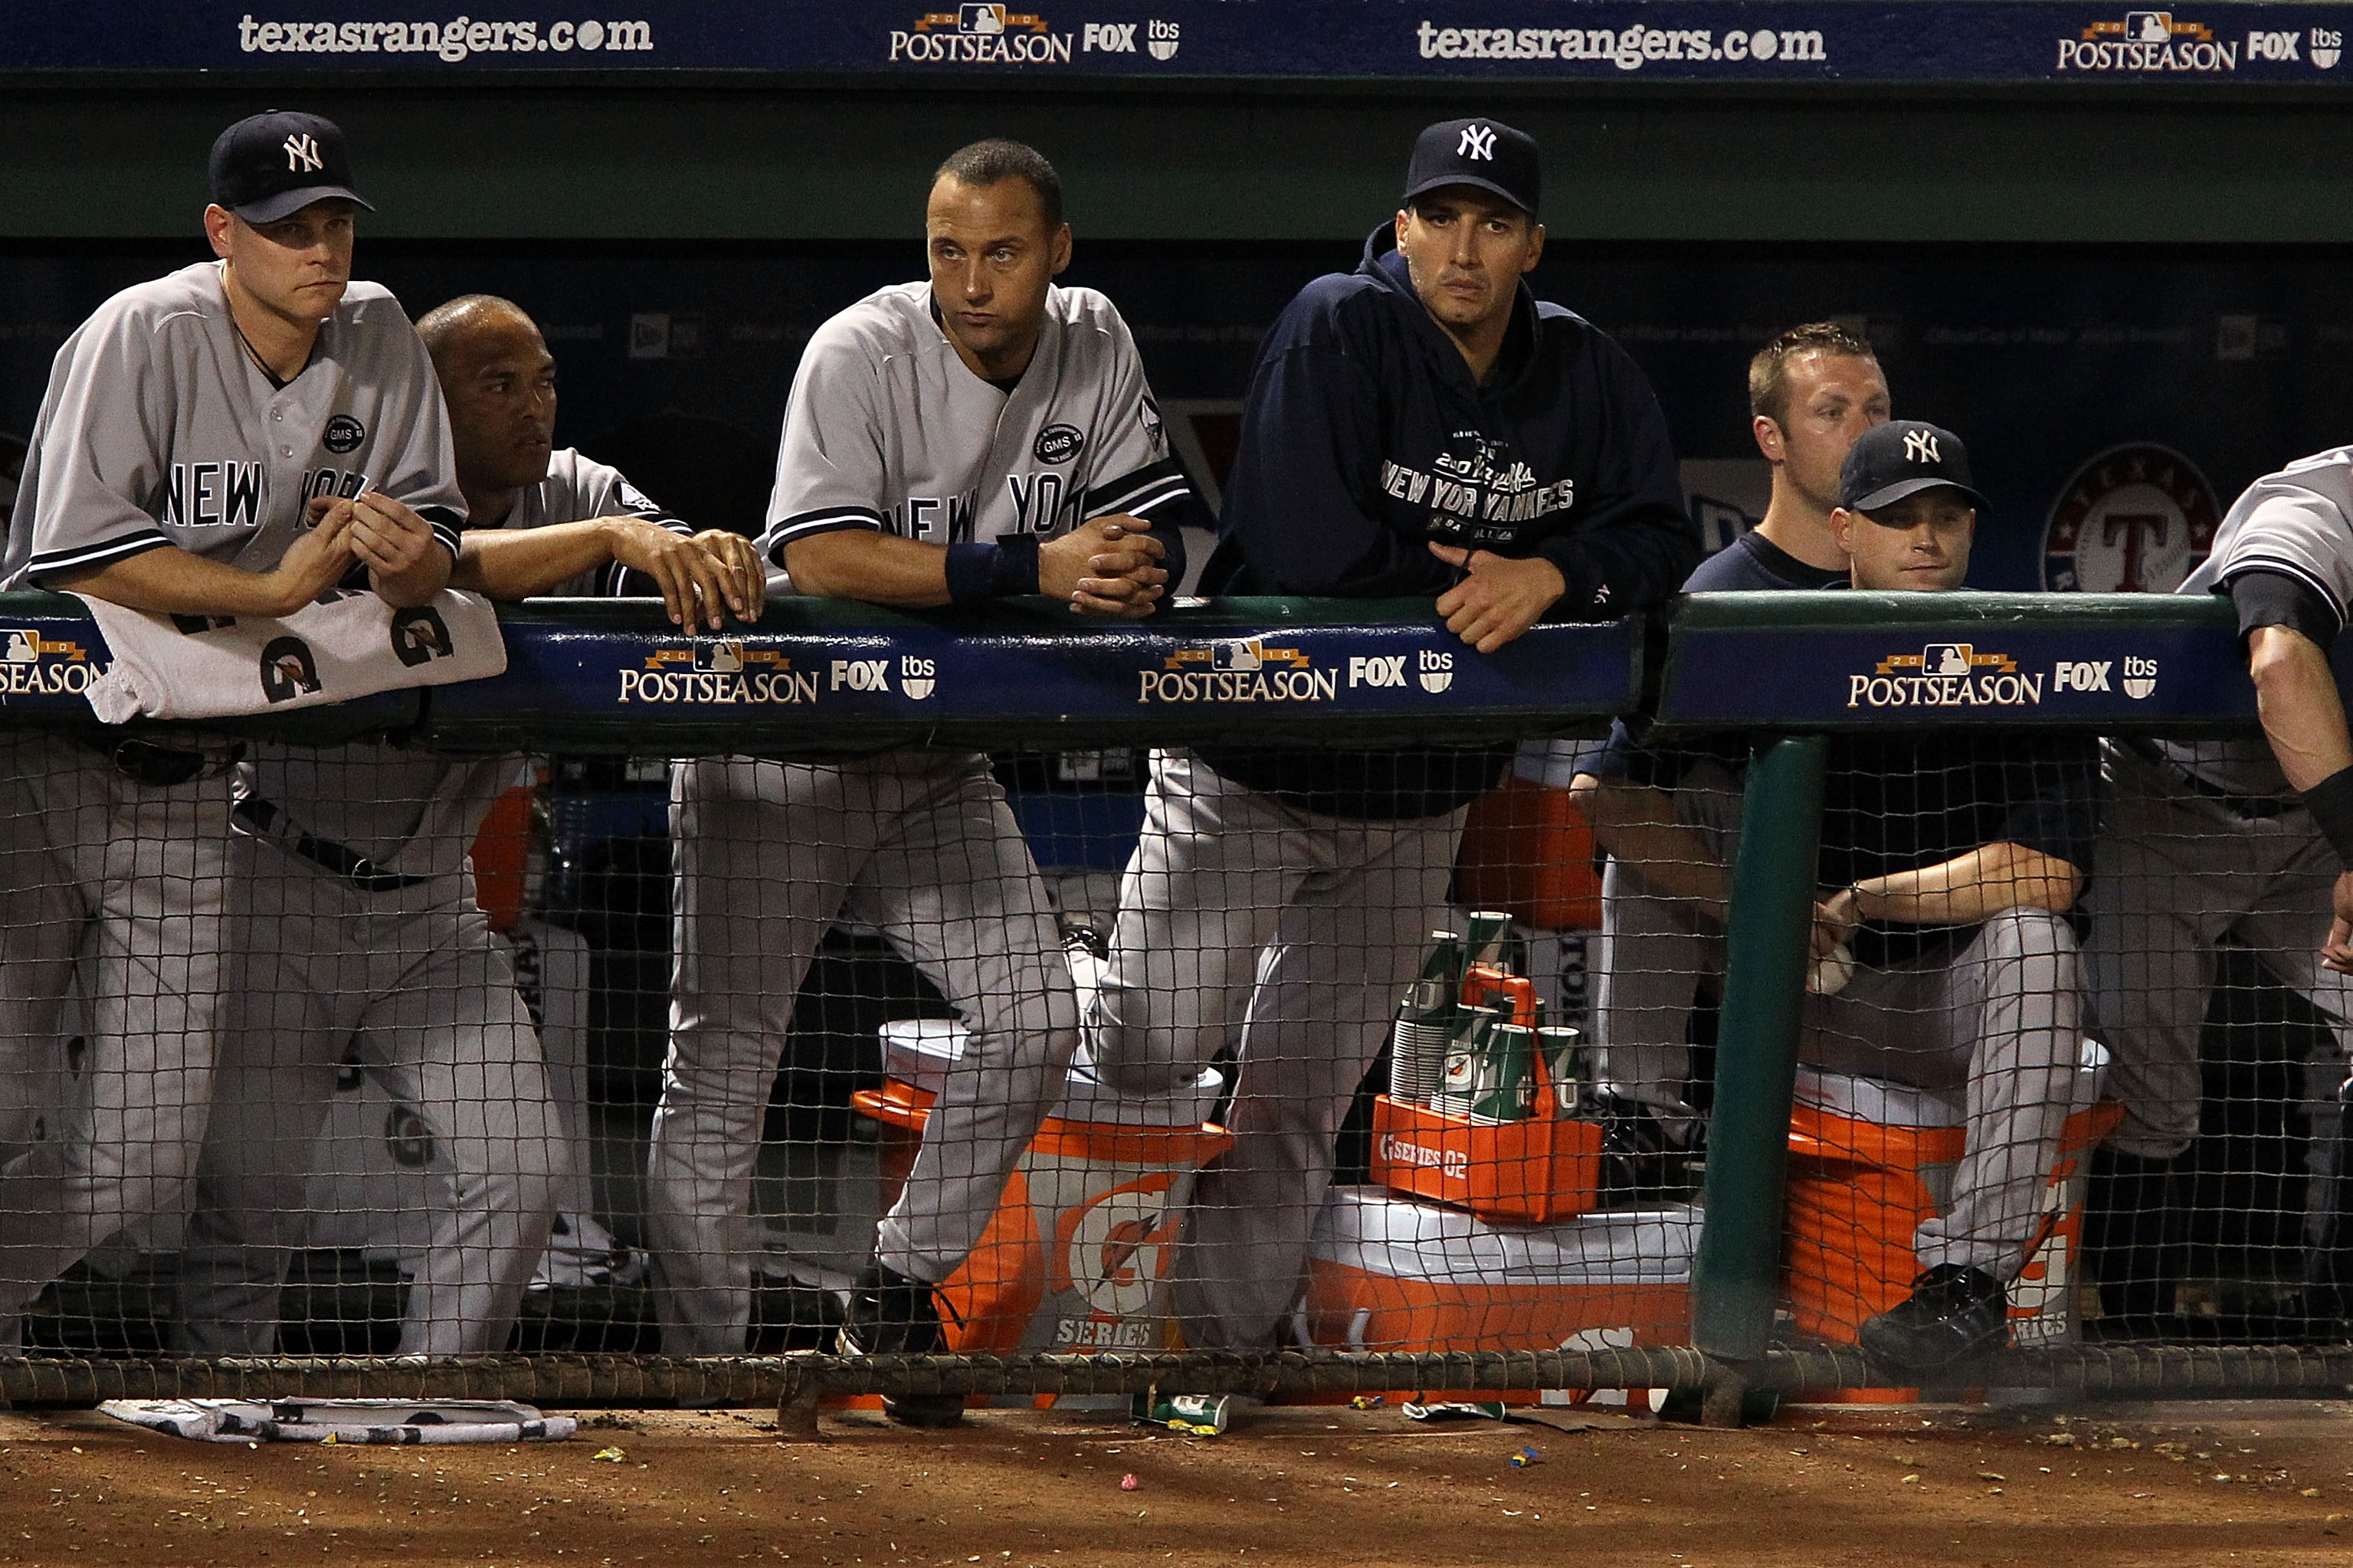 ARLINGTON, TX - OCTOBER 22:  (L-R) Kerry Wood #39, Mariano Rivera #42, Derek Jeter #2, and Andy Pettitte #46 of the New York Yankees look on from the dugout during Game Six of the ALCS against the Texas Rangers during the 2010 MLB Playoffs at Rangers Ball